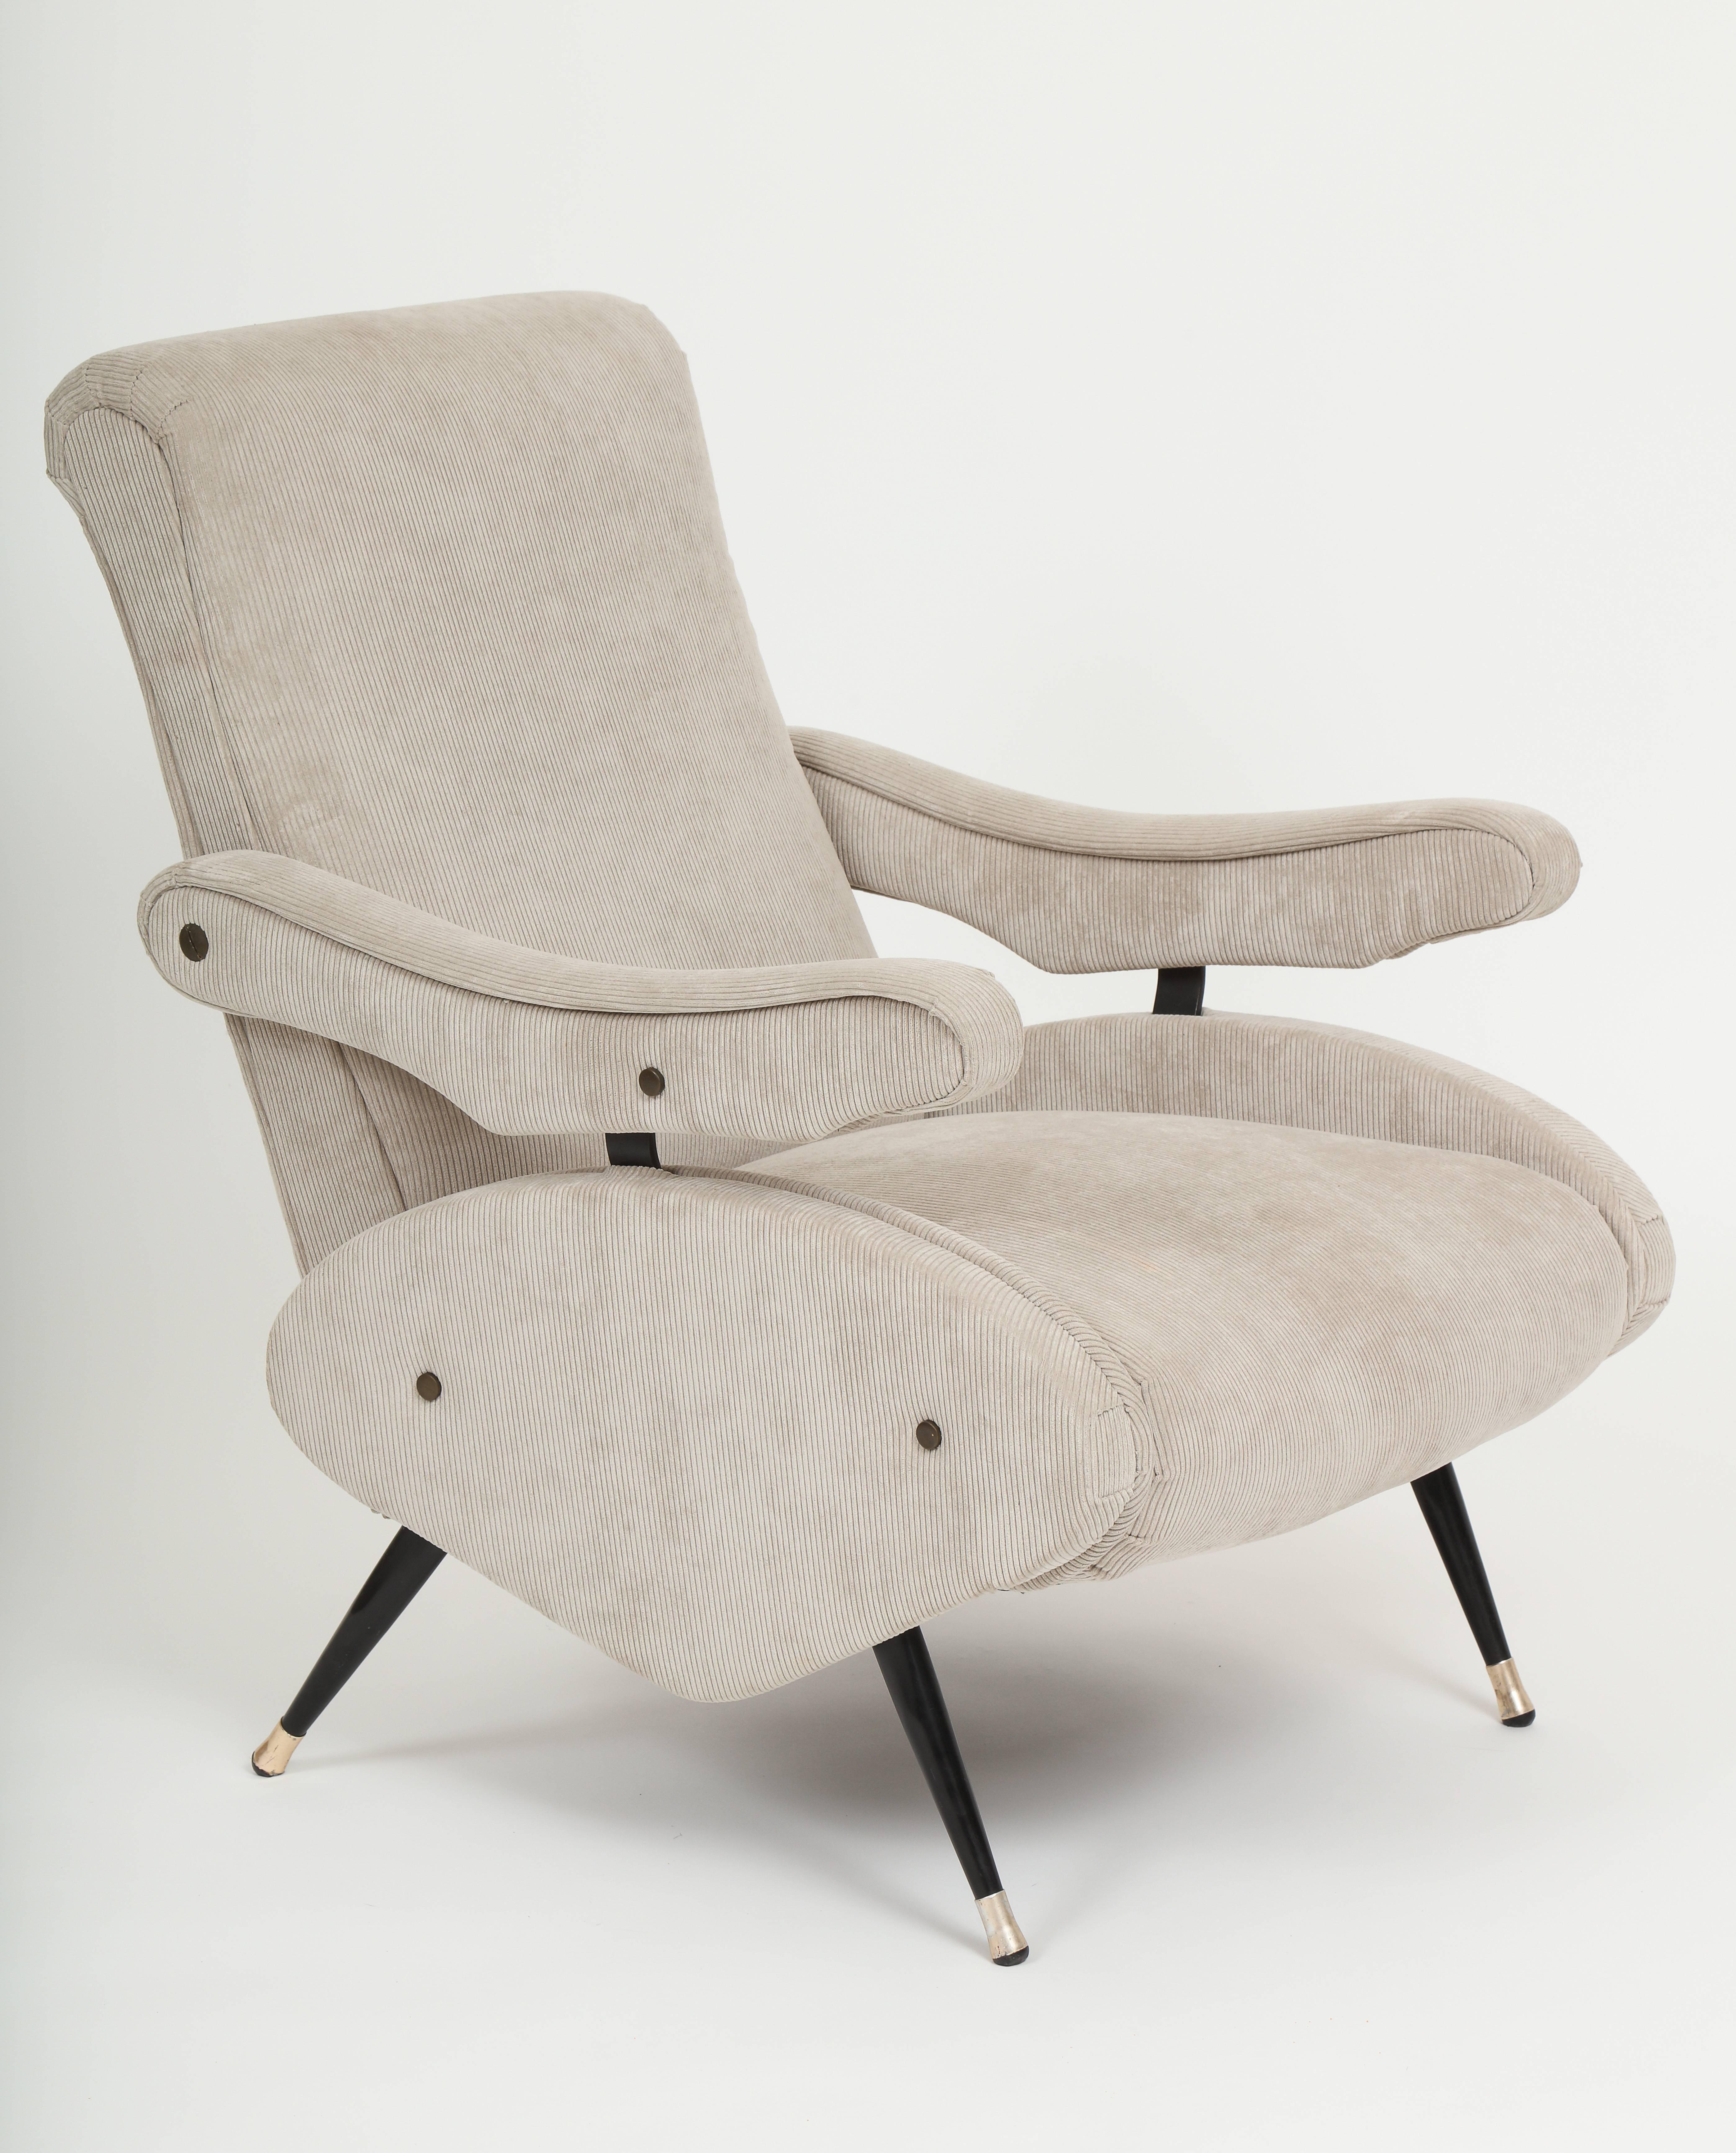 Italian reclining Zanuso style grey corduroy pair lounge chairs, Mid-Century

Beautiful architectural chairs. Very comfortable. Italy, 1950s-1960s. Recline in two positions.
Reupholstered in a light grey corduroy velvet fabric. Legs are metal and